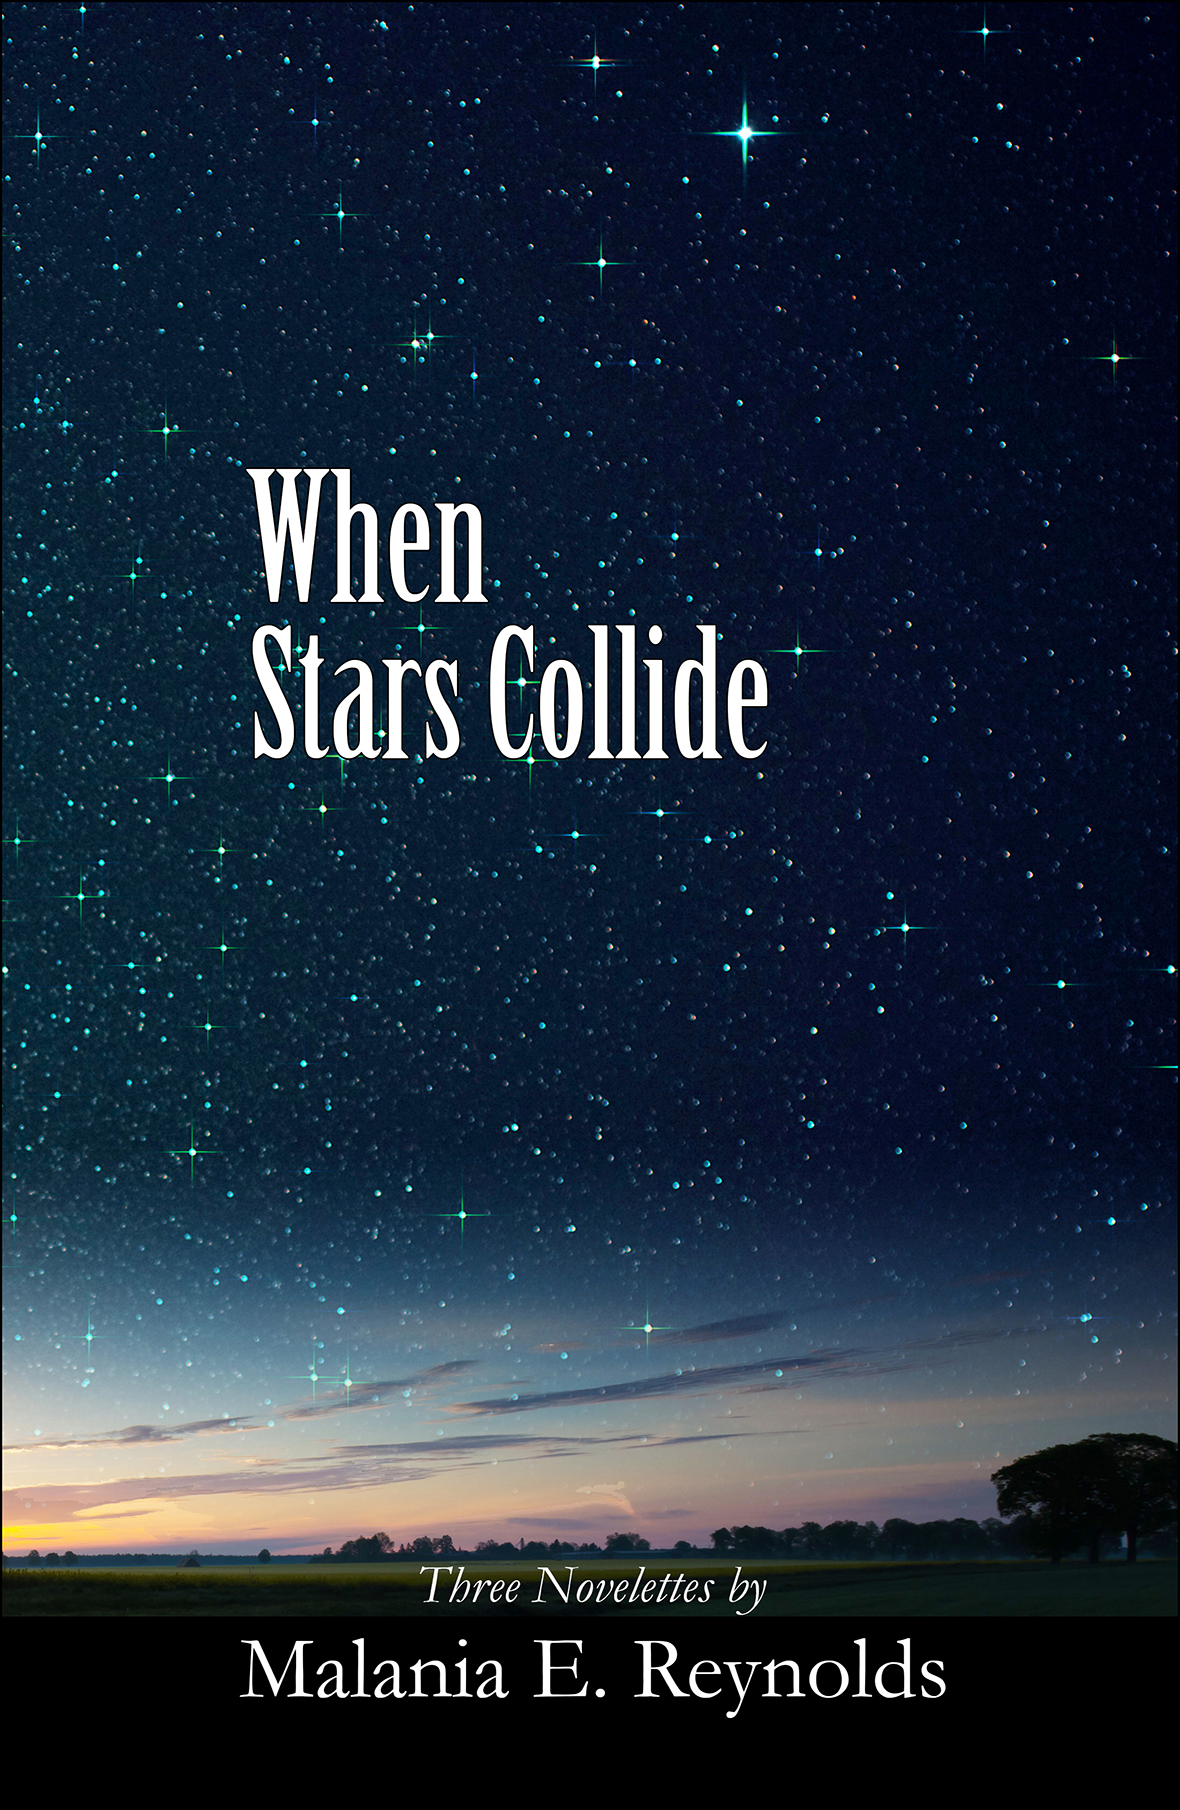 When Stars Collide Front Cover v3 reduced for web insertion